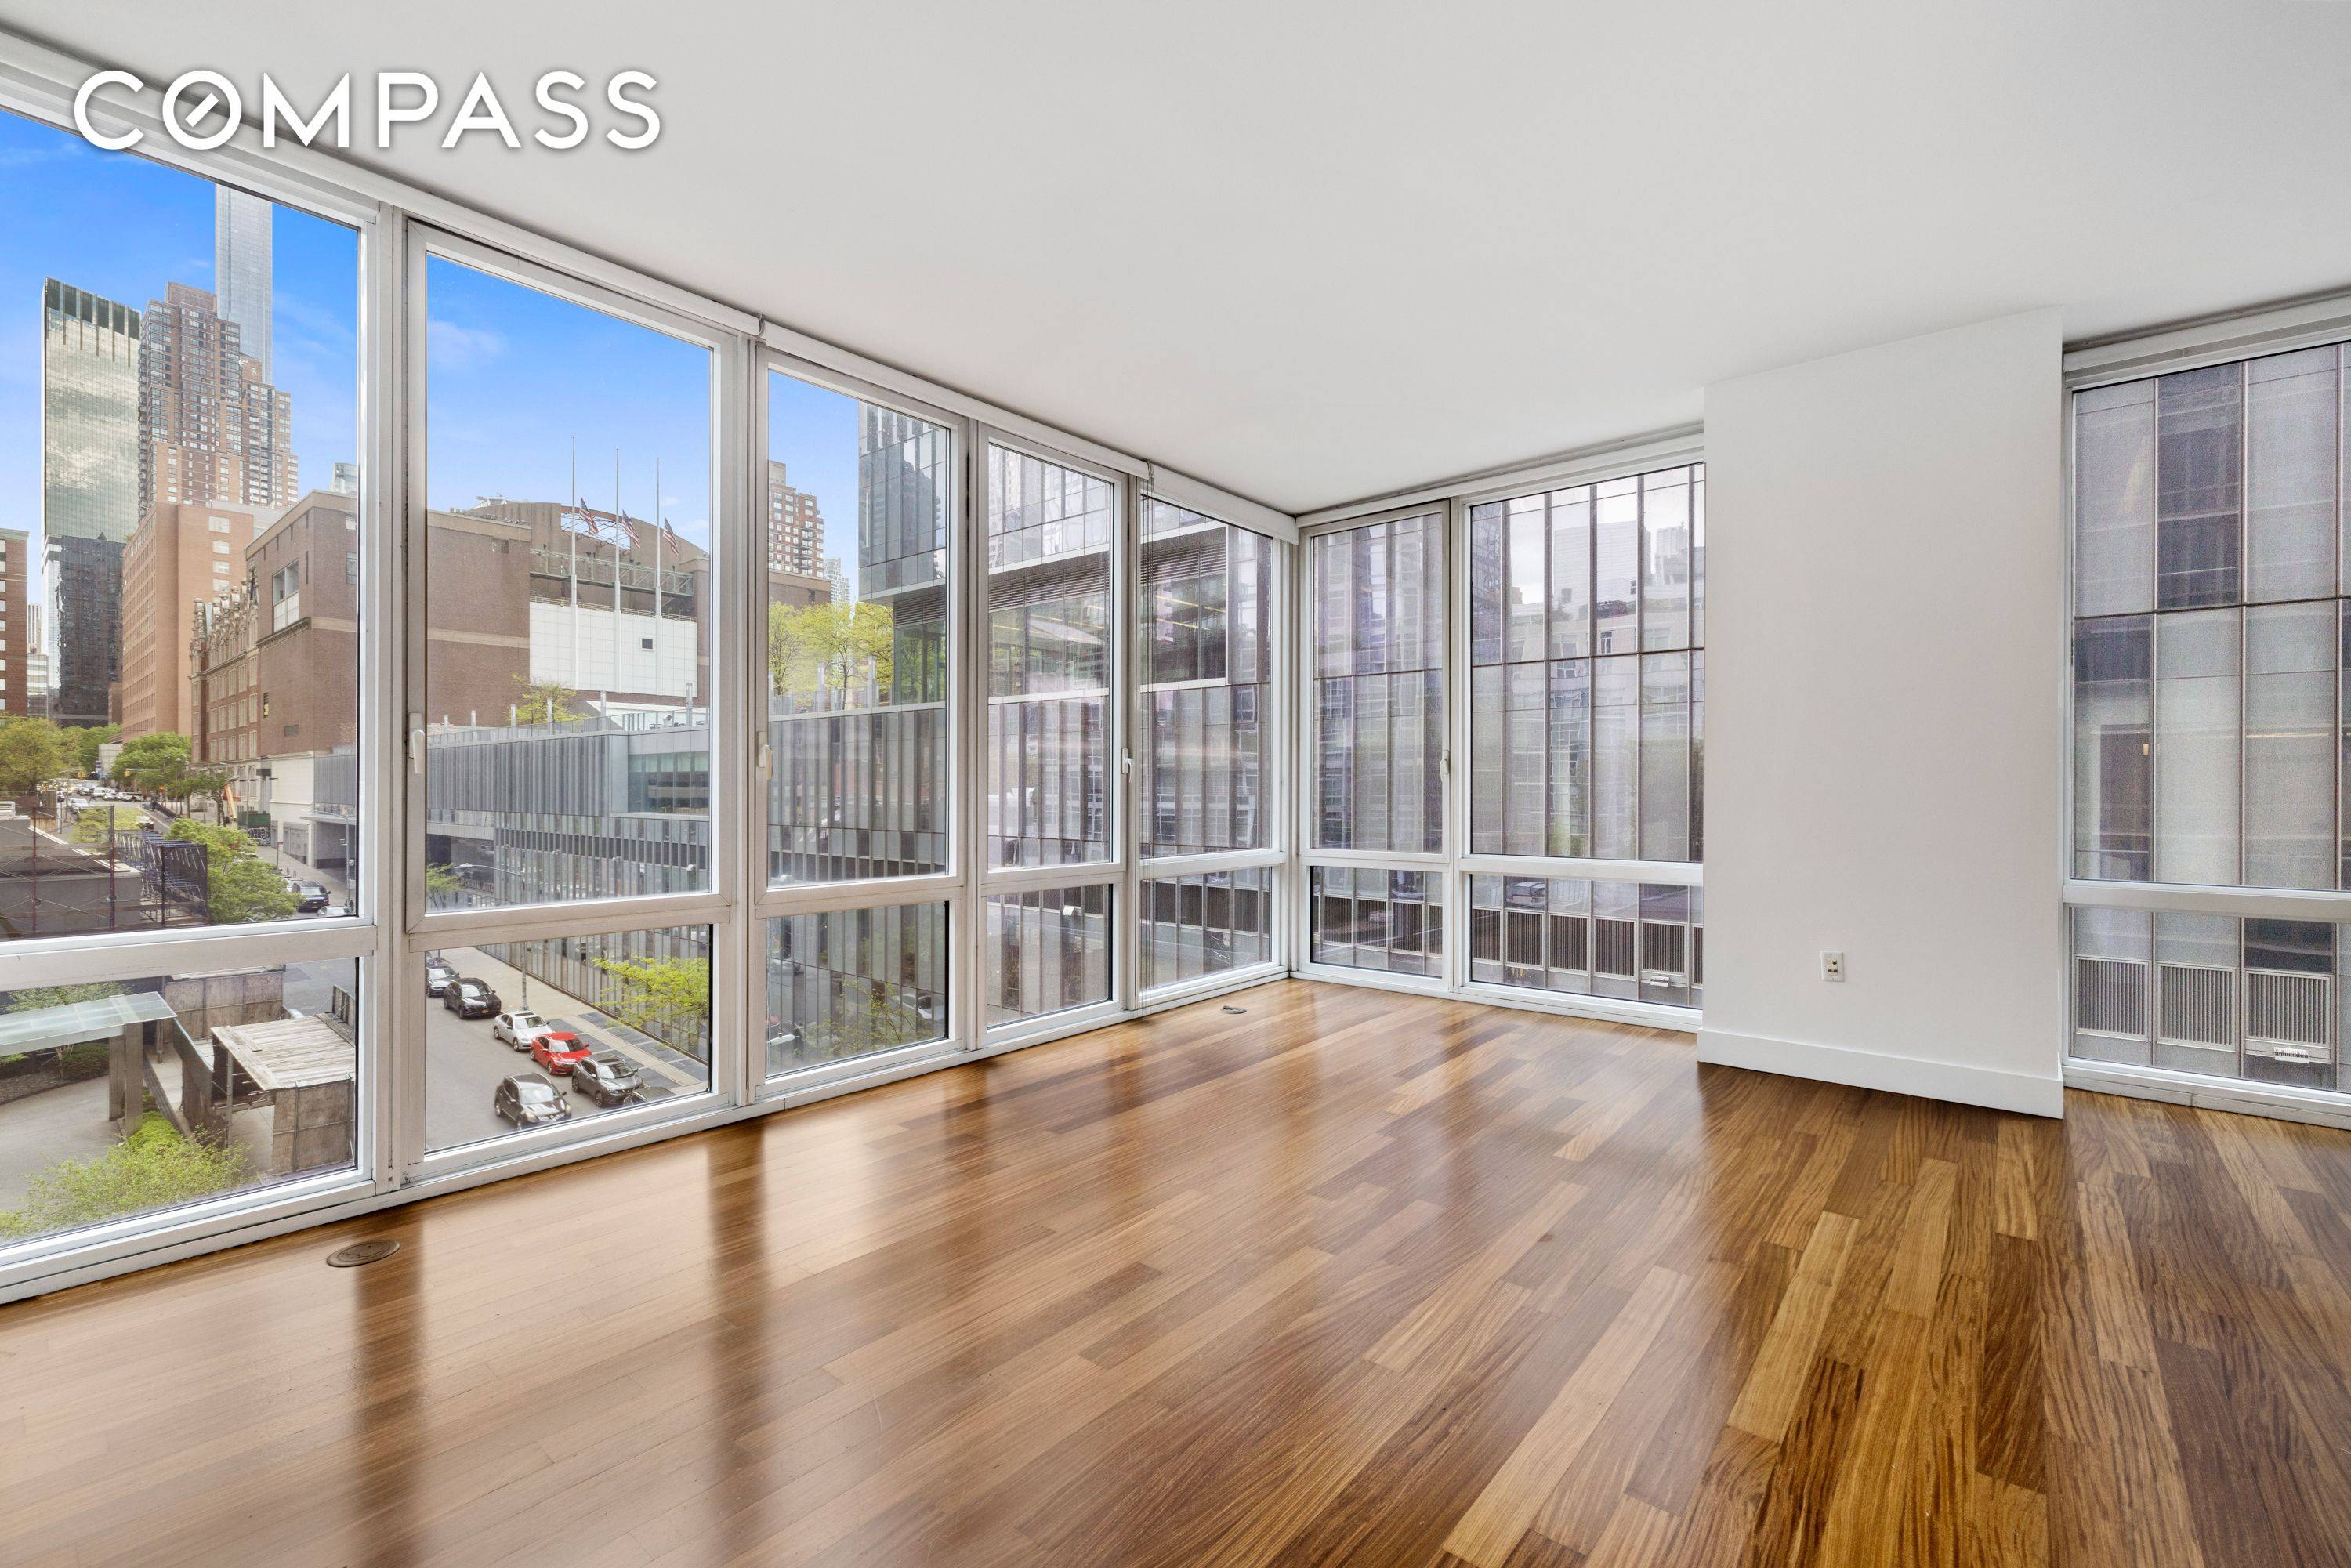 Welcome to 10 West End Avenue, an upscale, full service luxury condo building on the Upper West Side.